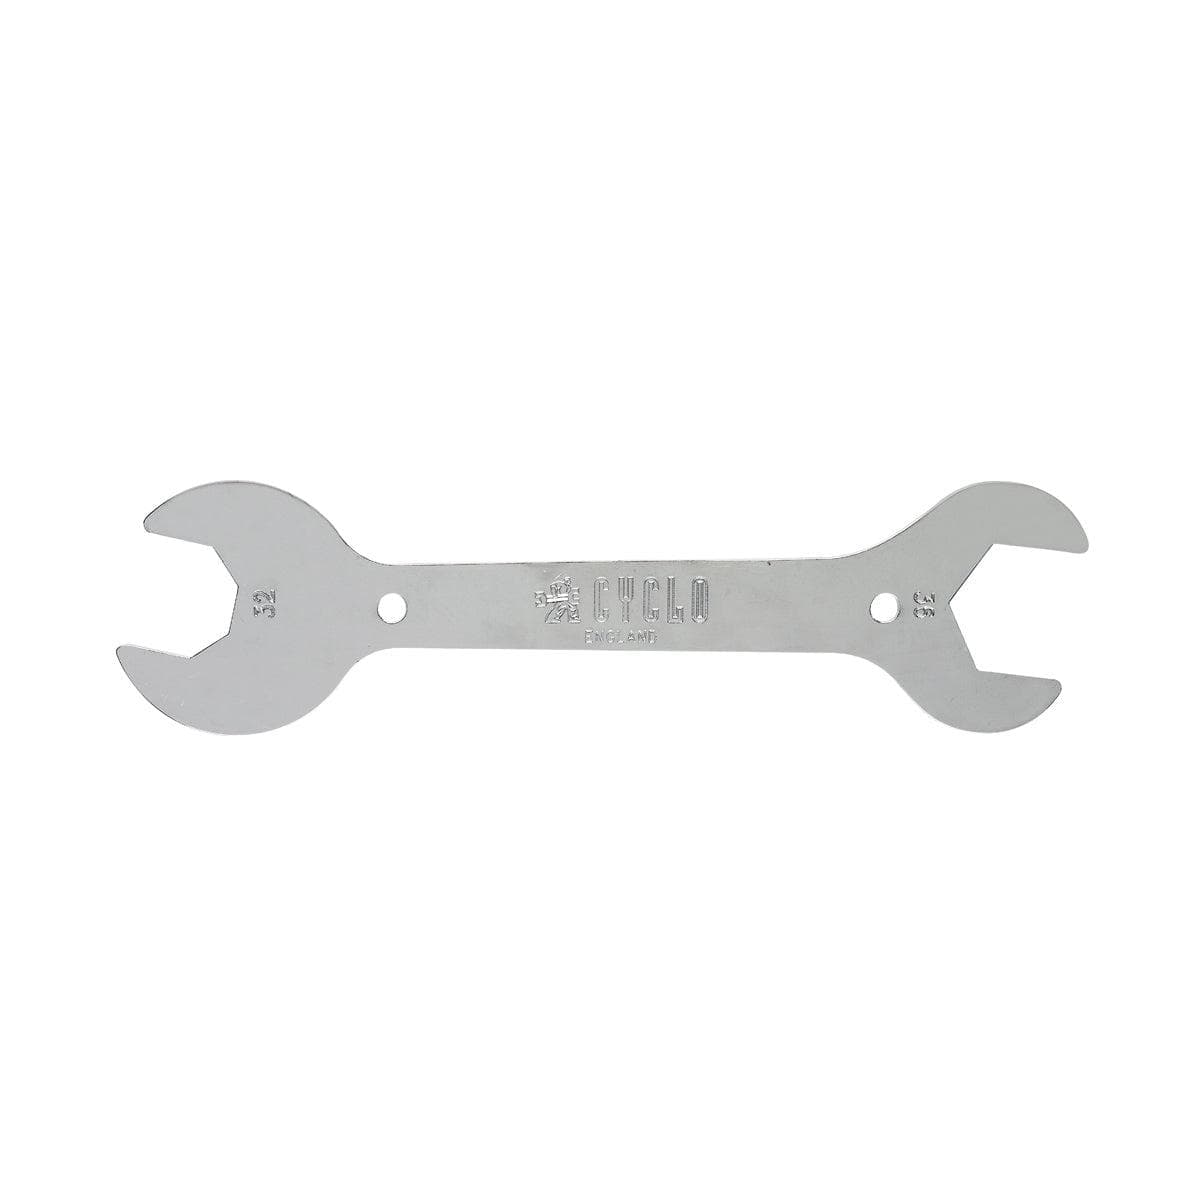 Cyclo 30/32Mm Oversize Headset Spanner: